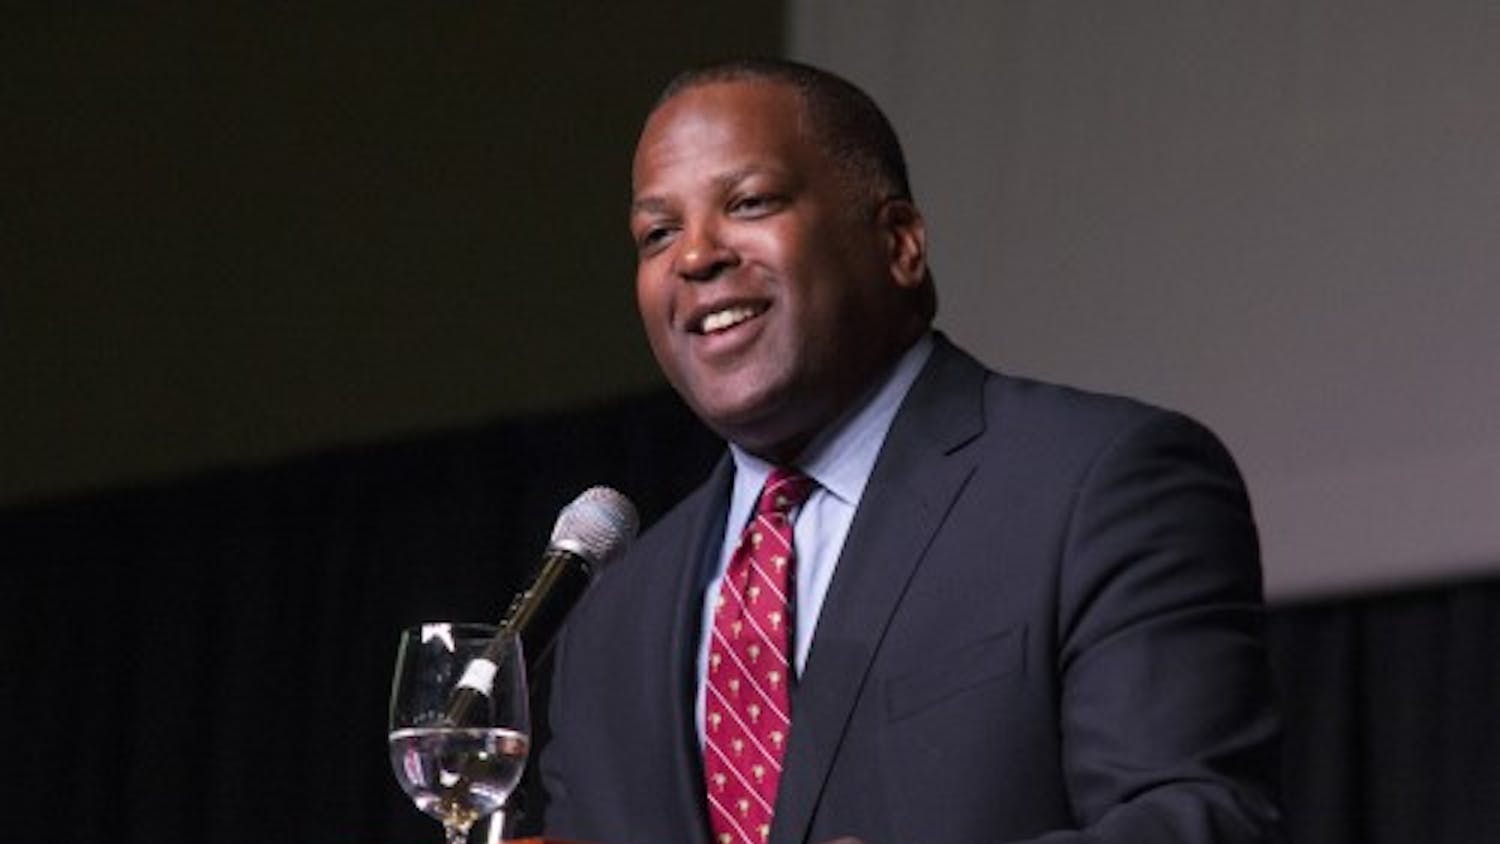 Mayor Steve Benjamin sets the agenda for his next term in office at the Columbia Metropolitan Convention Center on Tuesday, focusing on city improvements.